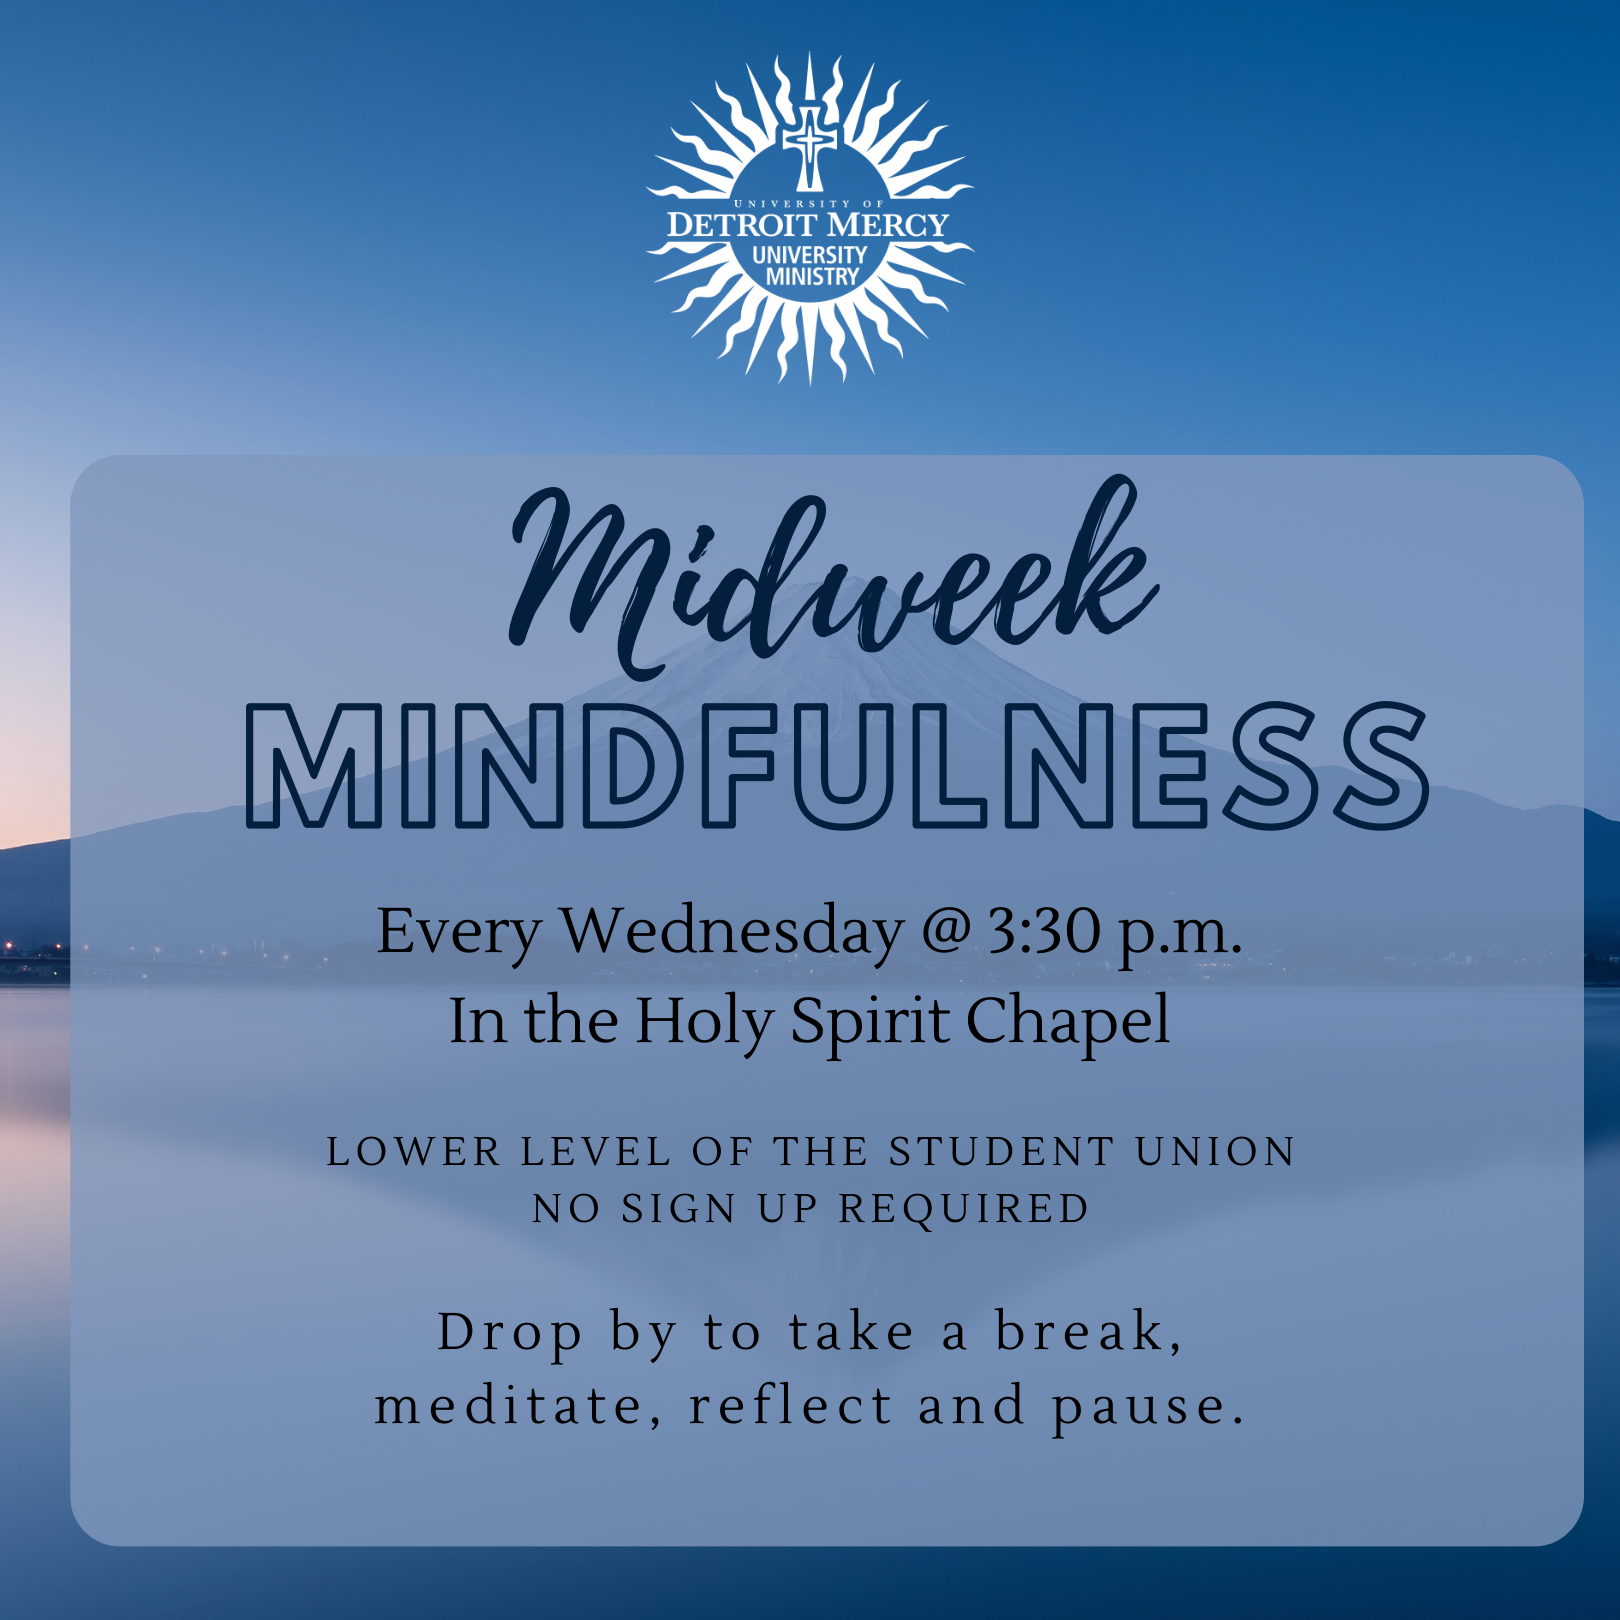 Flyer with Ministry Logo and Midweek Mindfulness Info